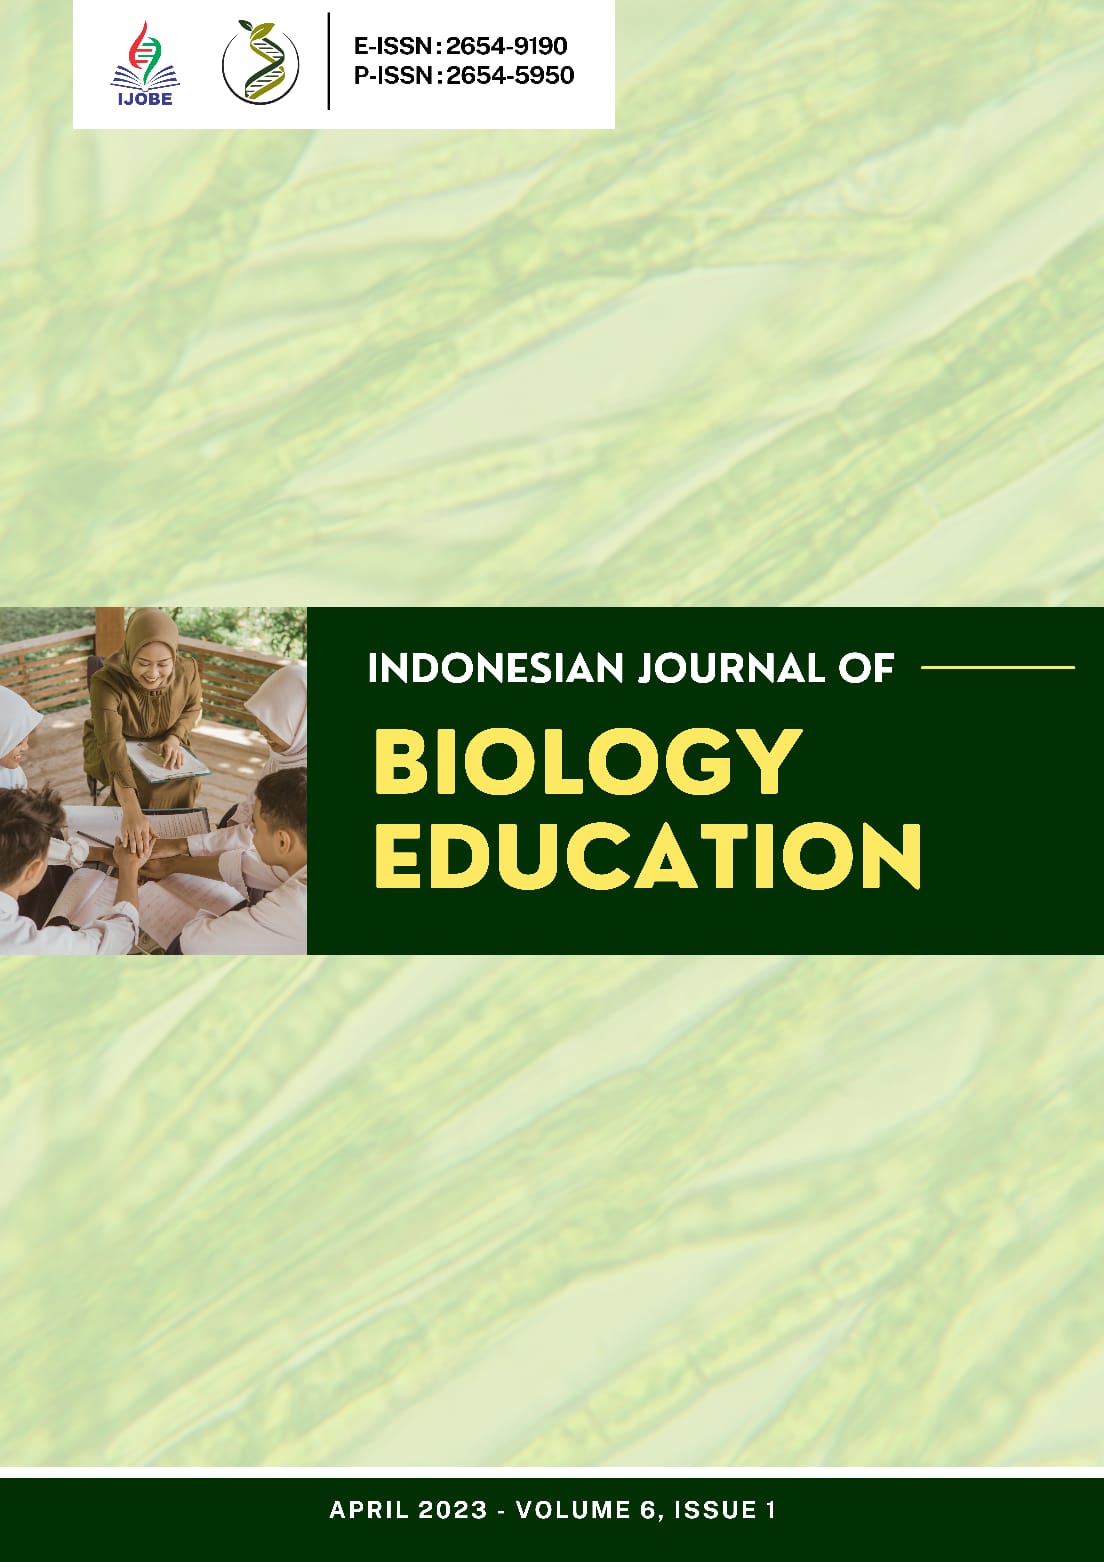 					View Vol. 6 No. 1 (2023): INDONESIAN JOURNAL OF BIOLOGY EDUCATION
				